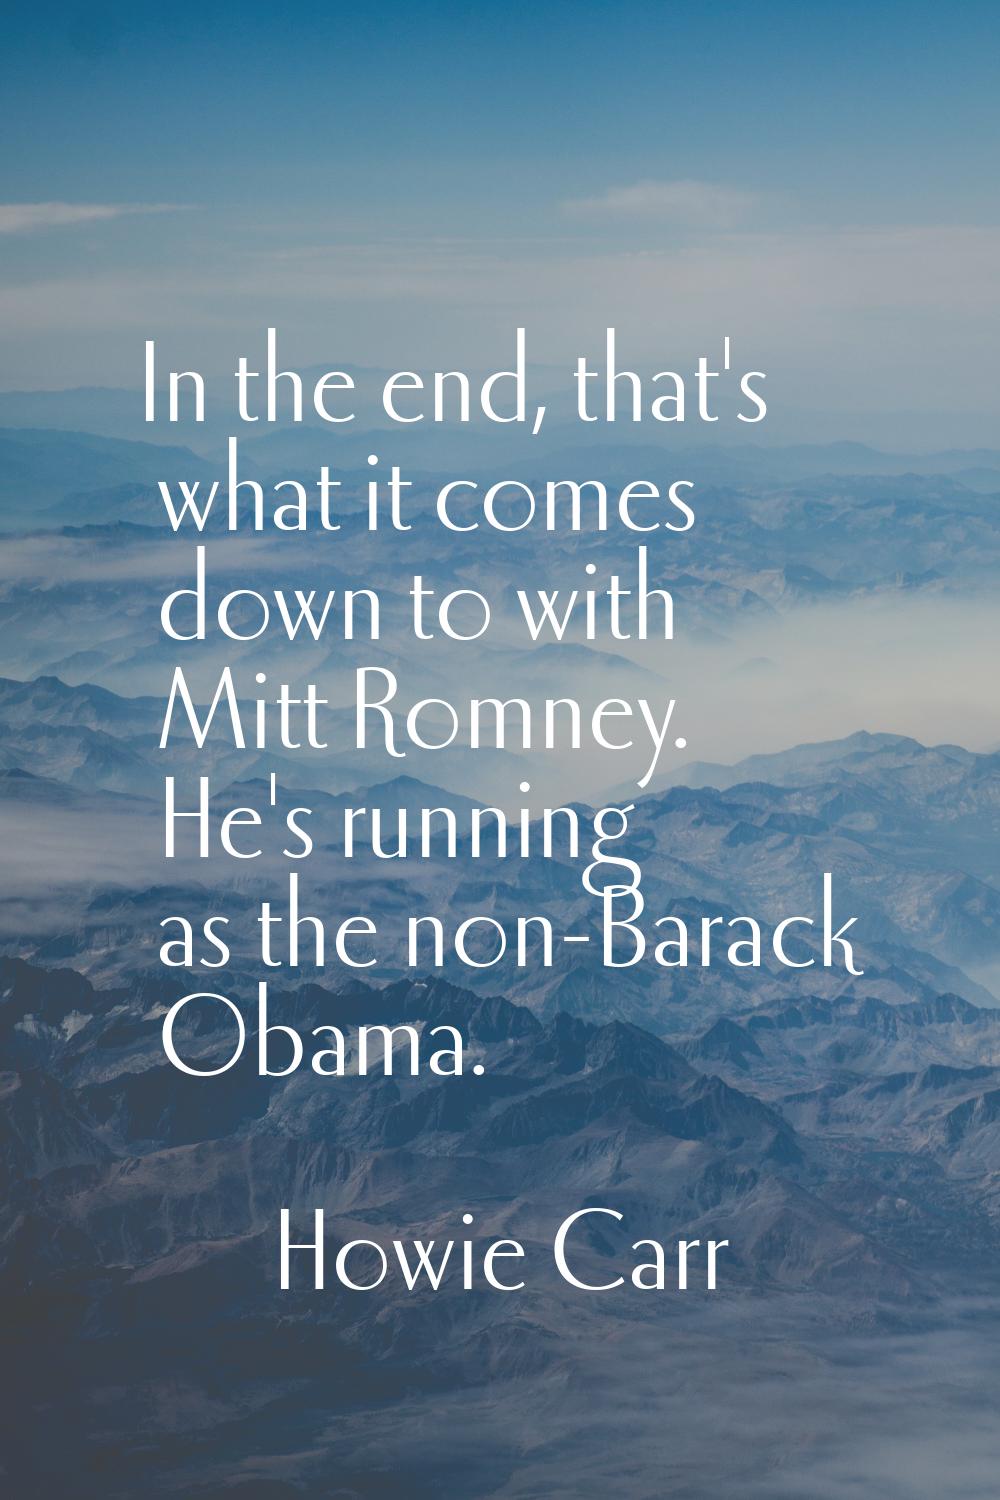 In the end, that's what it comes down to with Mitt Romney. He's running as the non-Barack Obama.